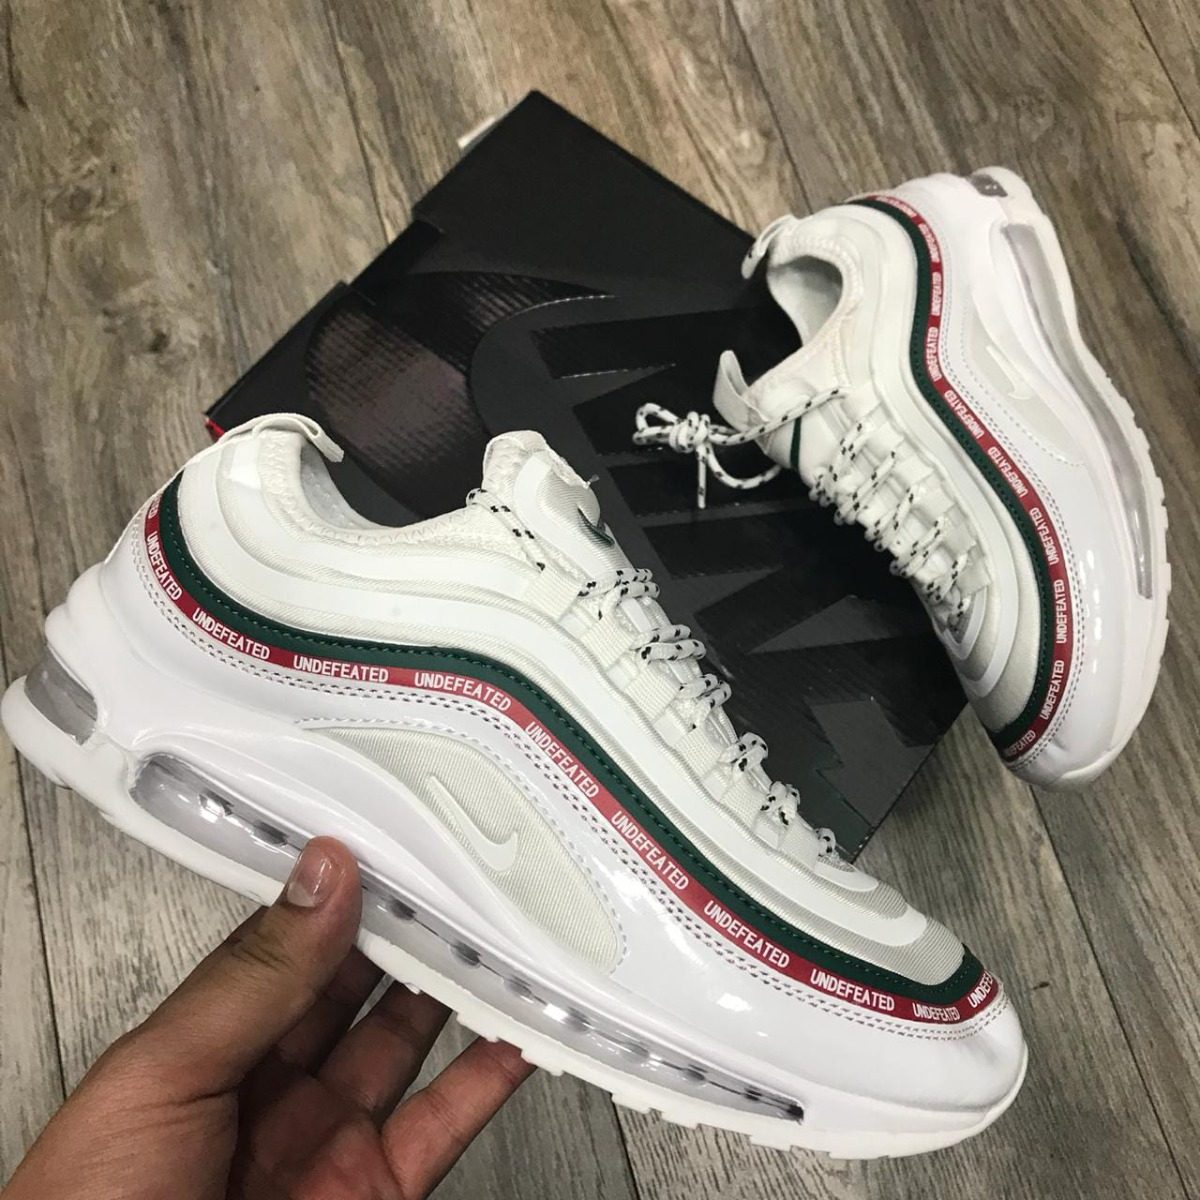 nike air max 97 undefeated blancas